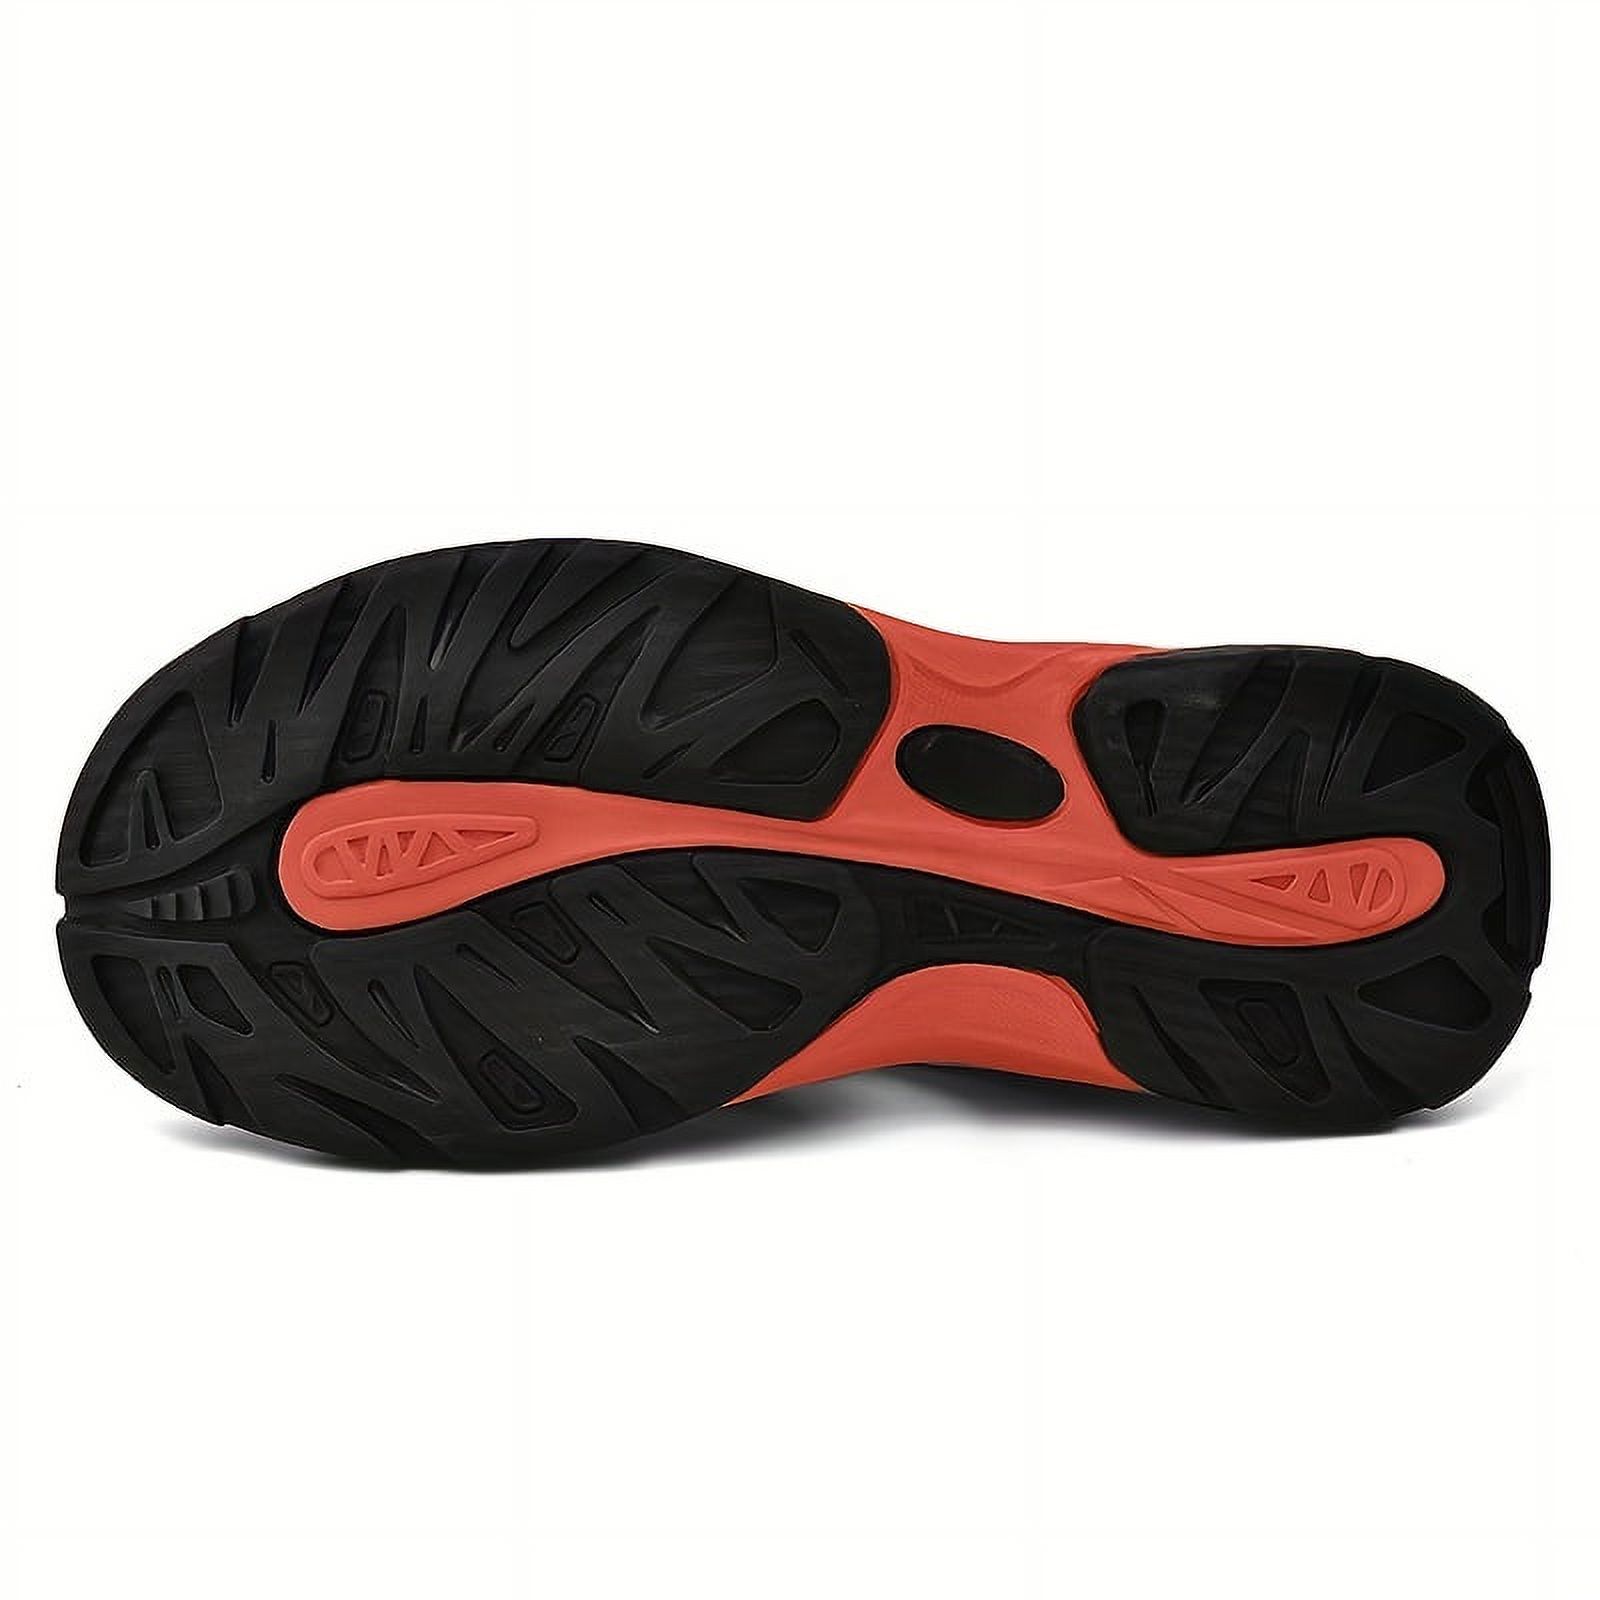 Men's Sandals, Spring And Summer Durable Non Slip Outdoor Hiking ...